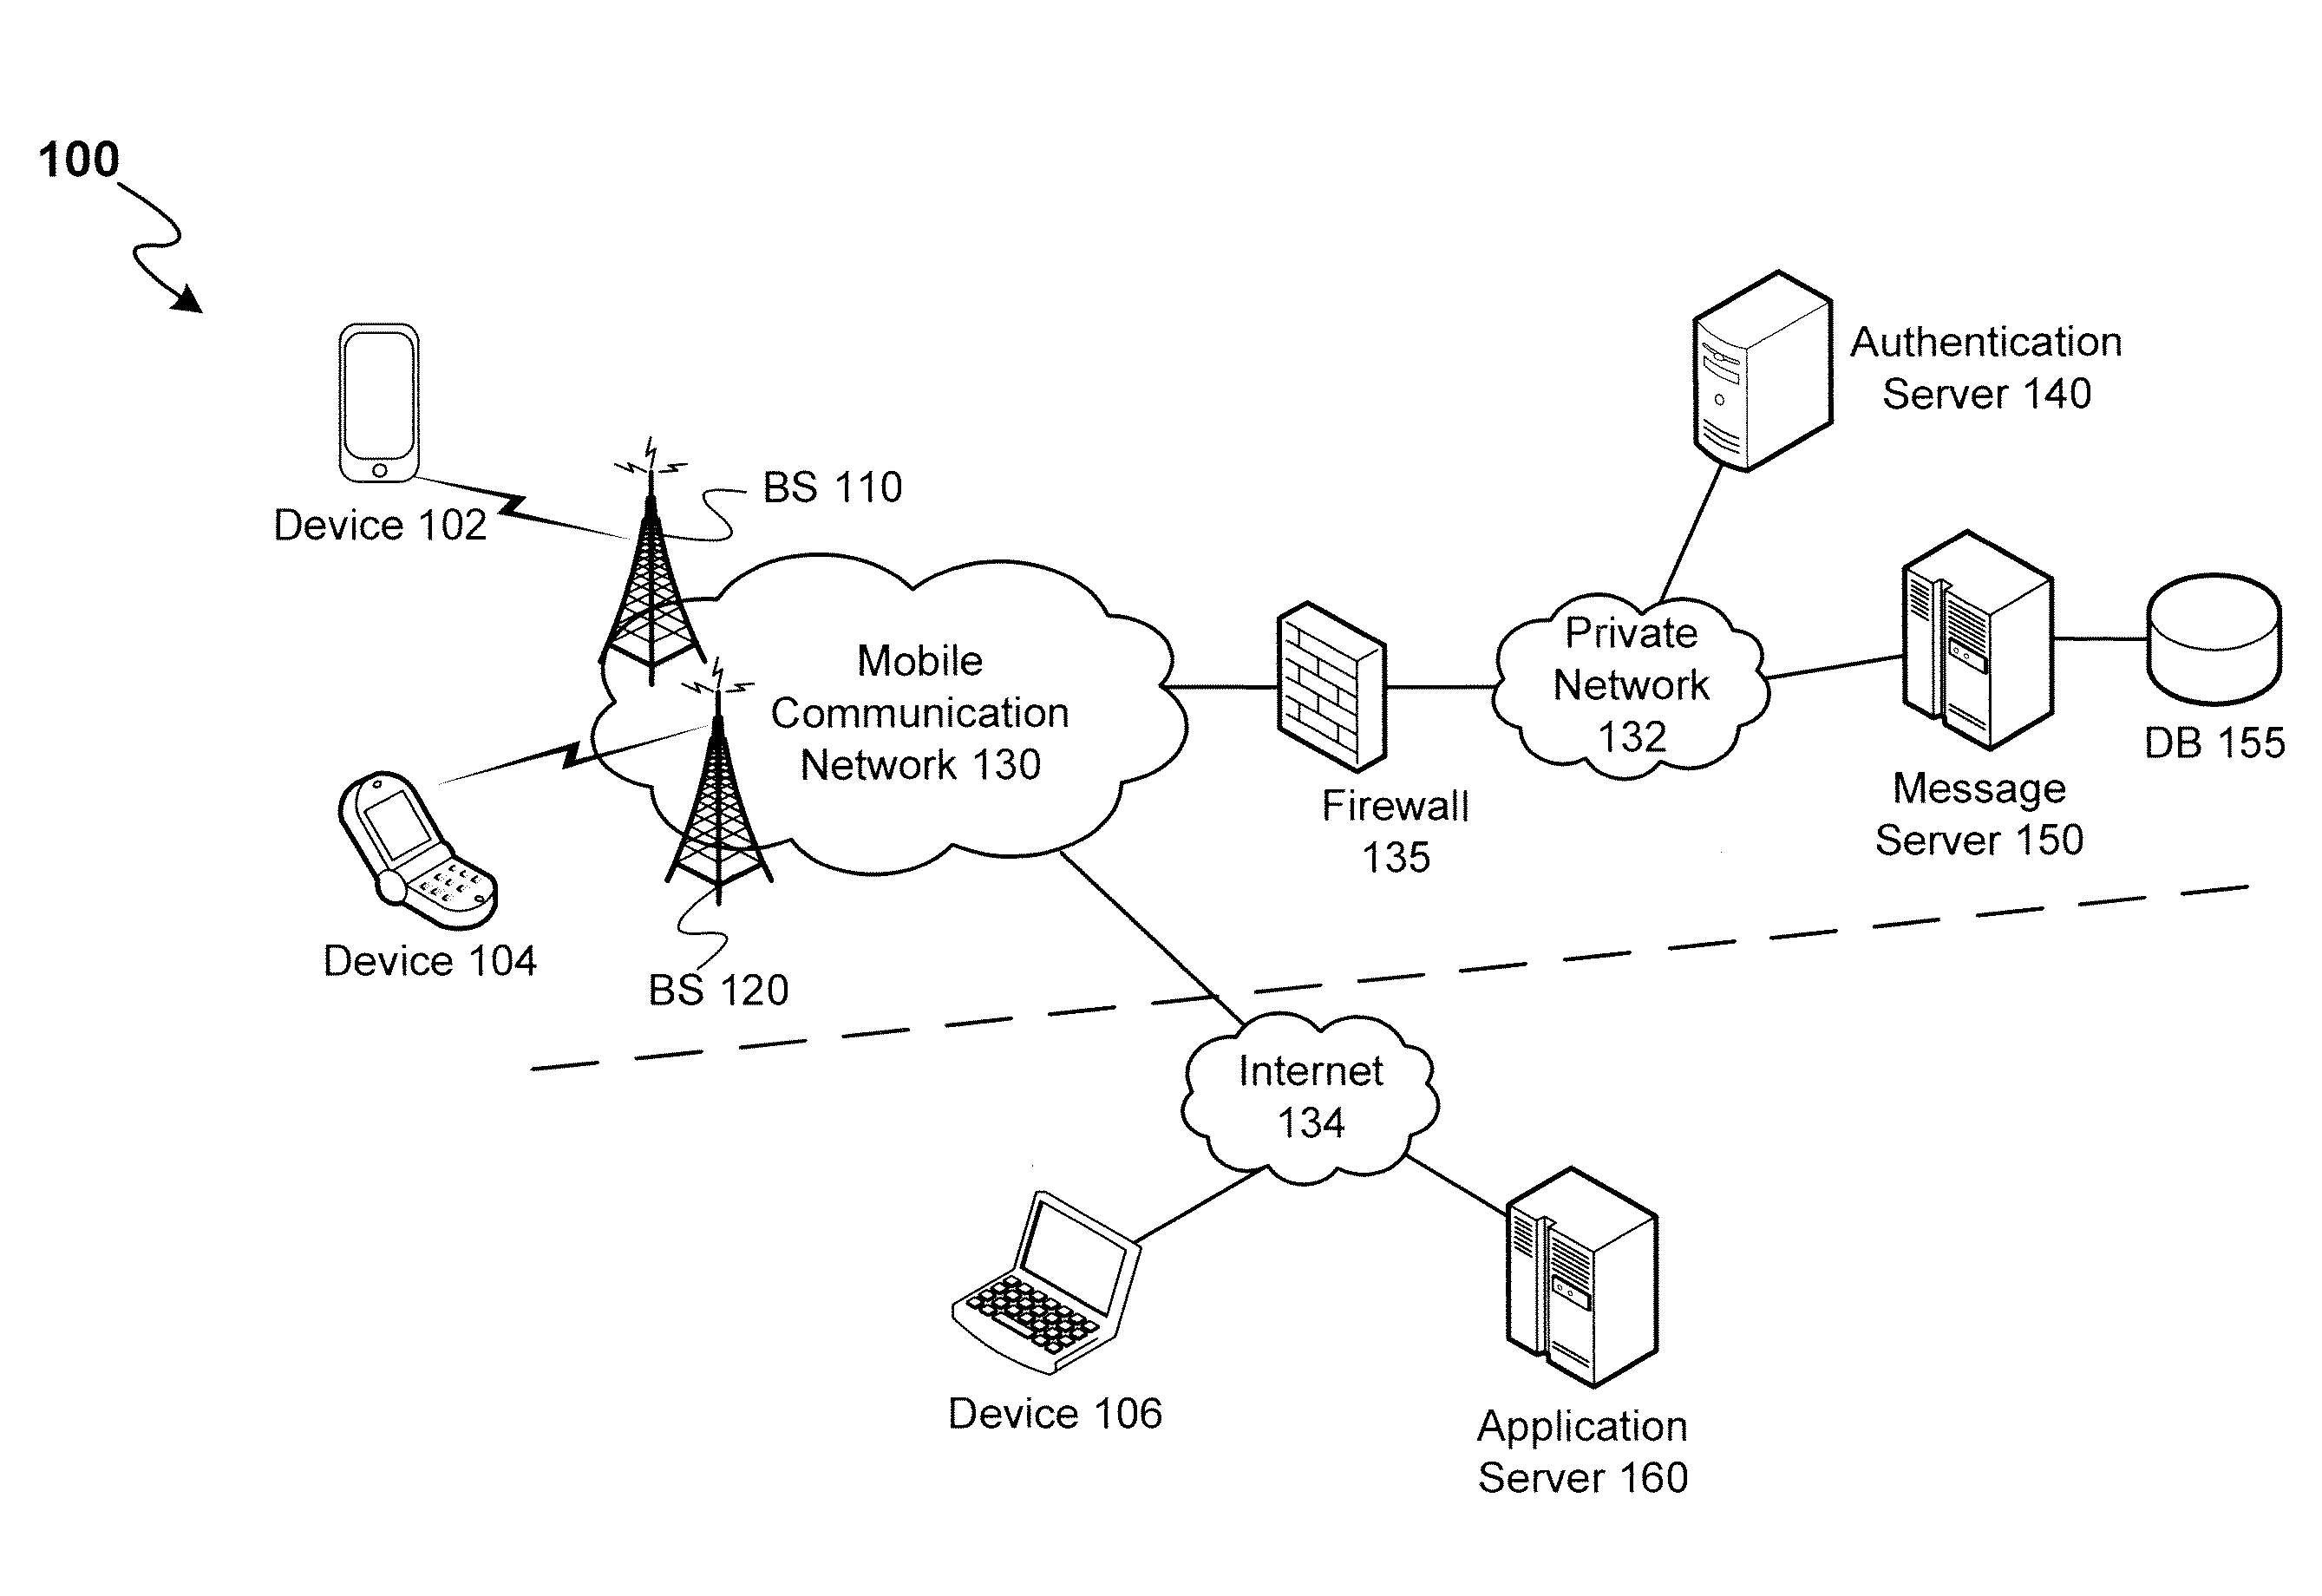 Modified messaging server call flow for secured mobile-to-mobile messaging